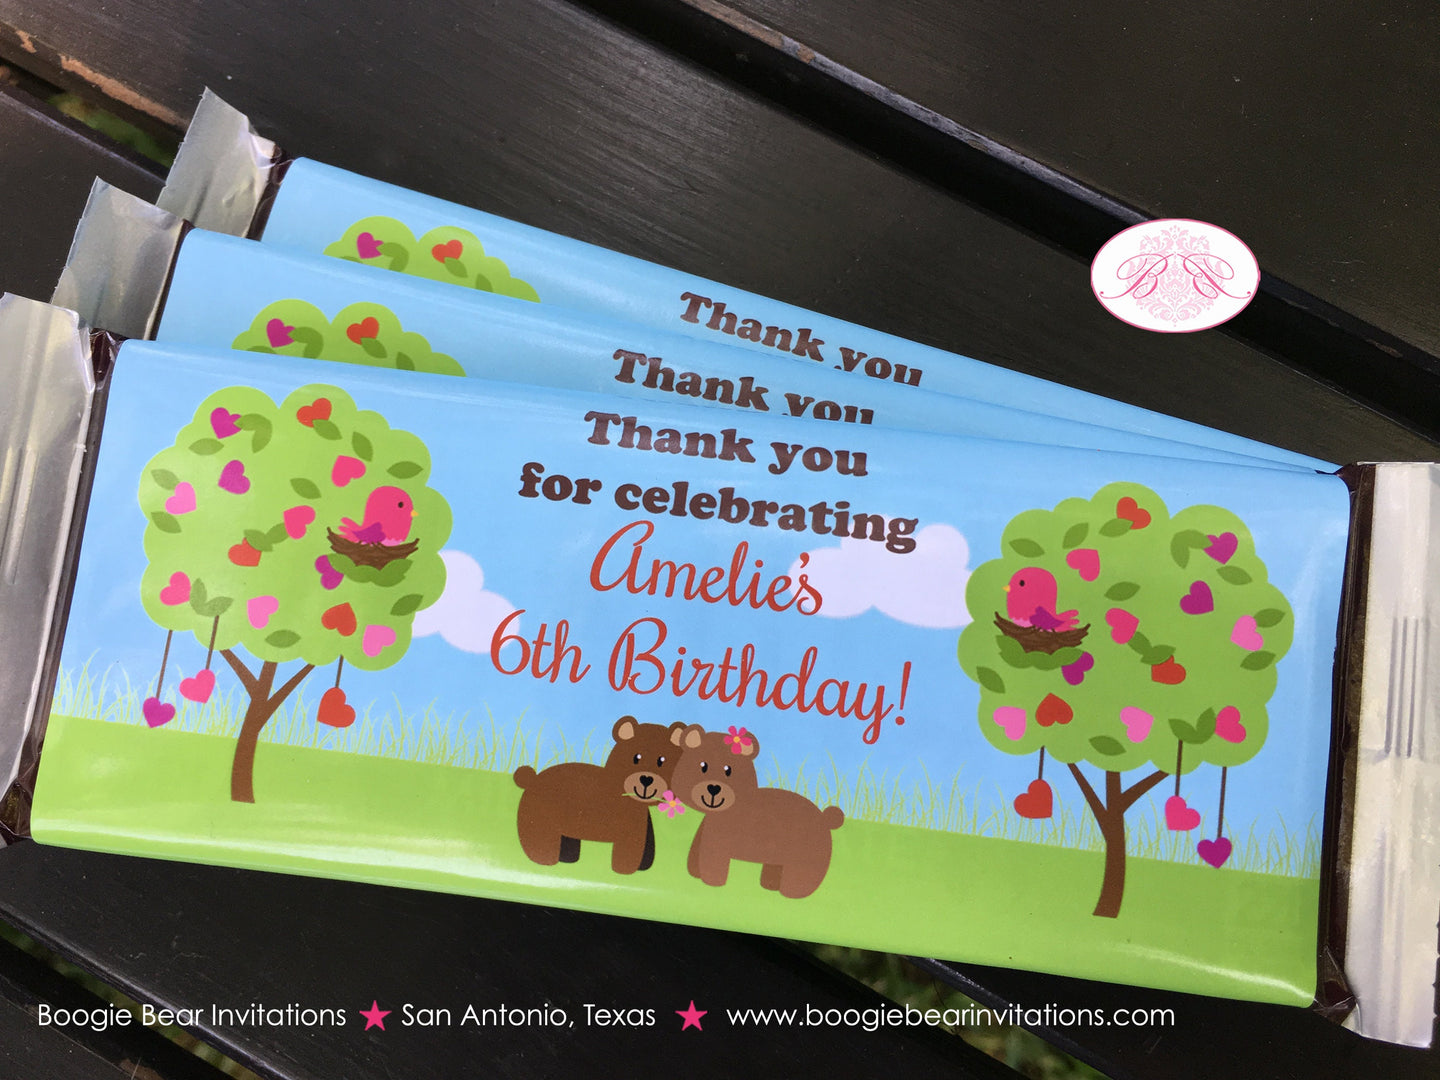 Valentines Day Woodland Birthday Party Candy Bar Wraps Sticker Creatures Girl Boy Heart Forest Animals Boogie Bear Invitations Amelie Theme